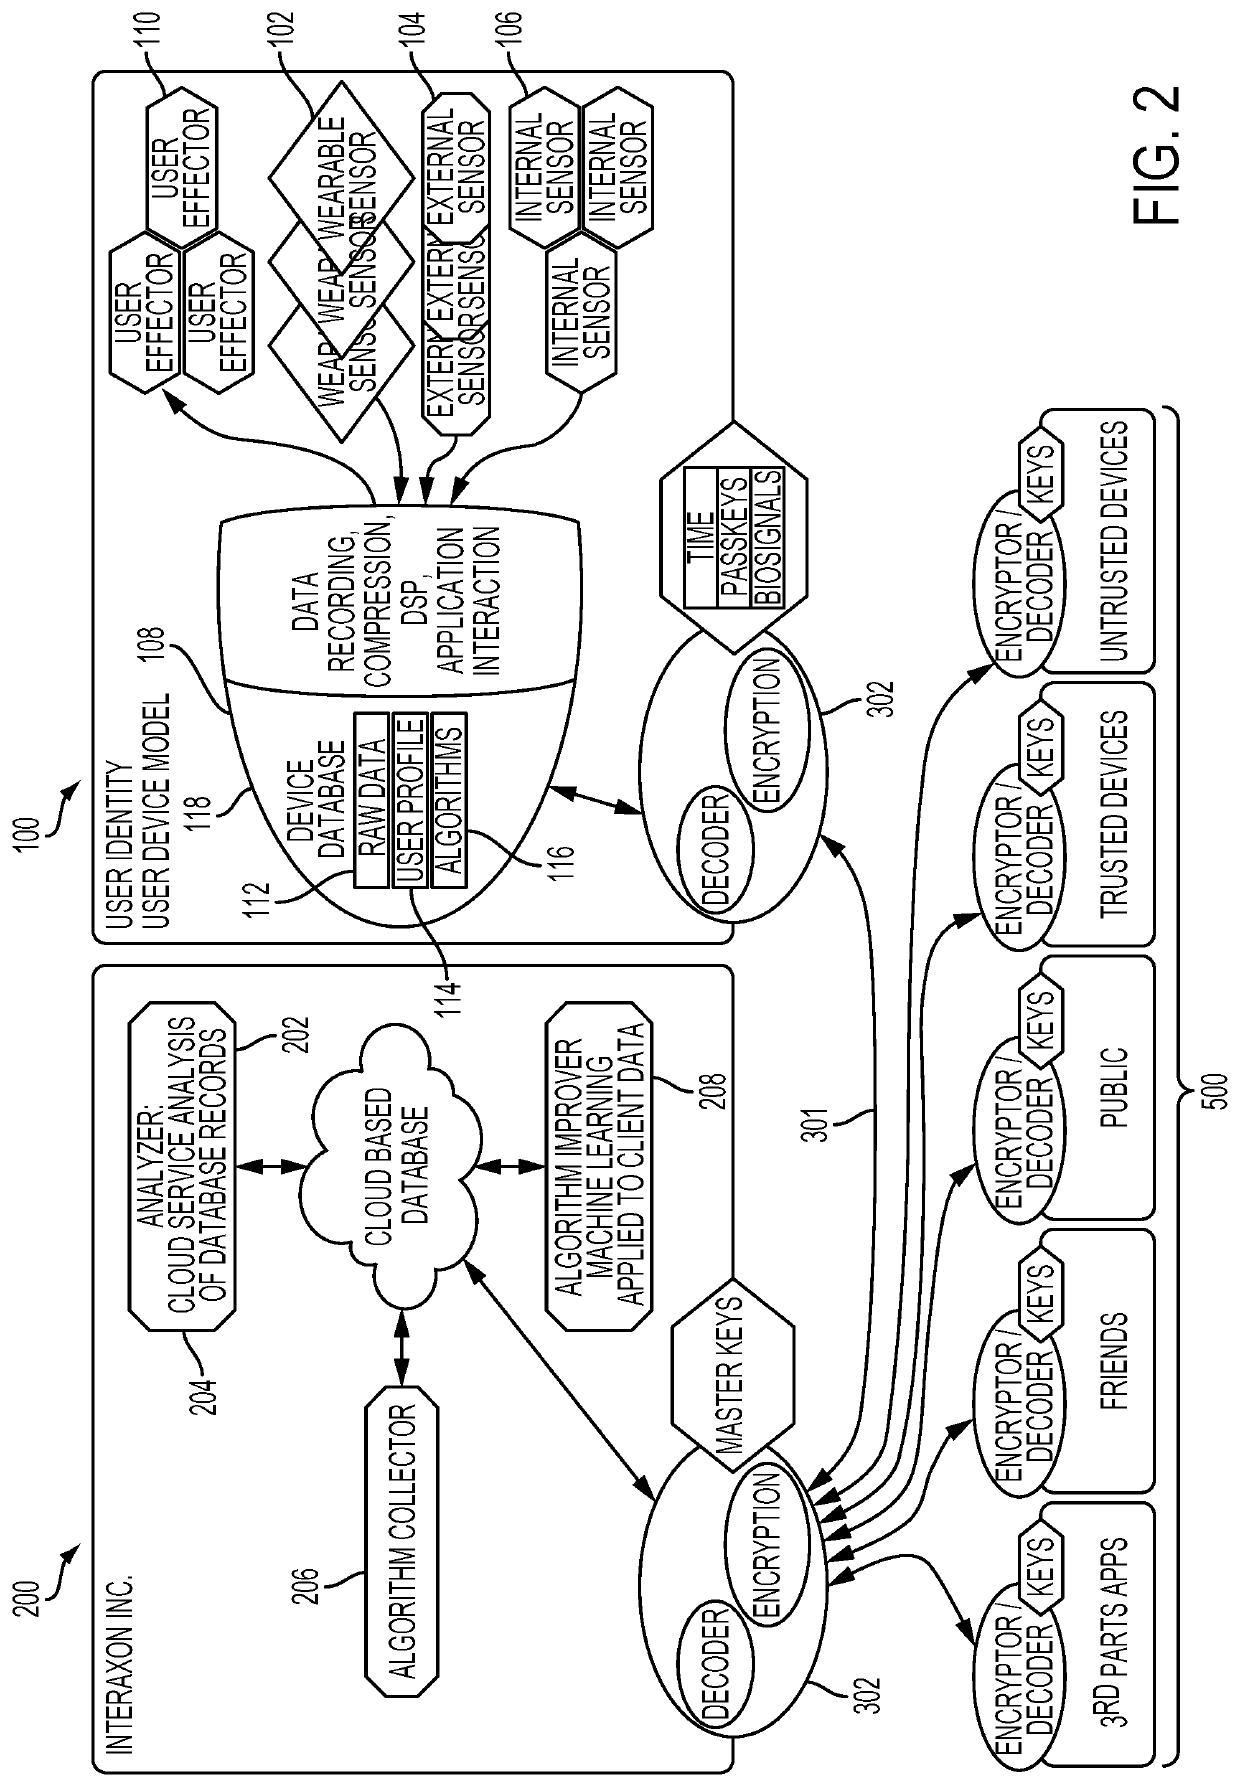 Systems and methods for collecting, analyzing, and sharing bio-signal and non-bio-signal data